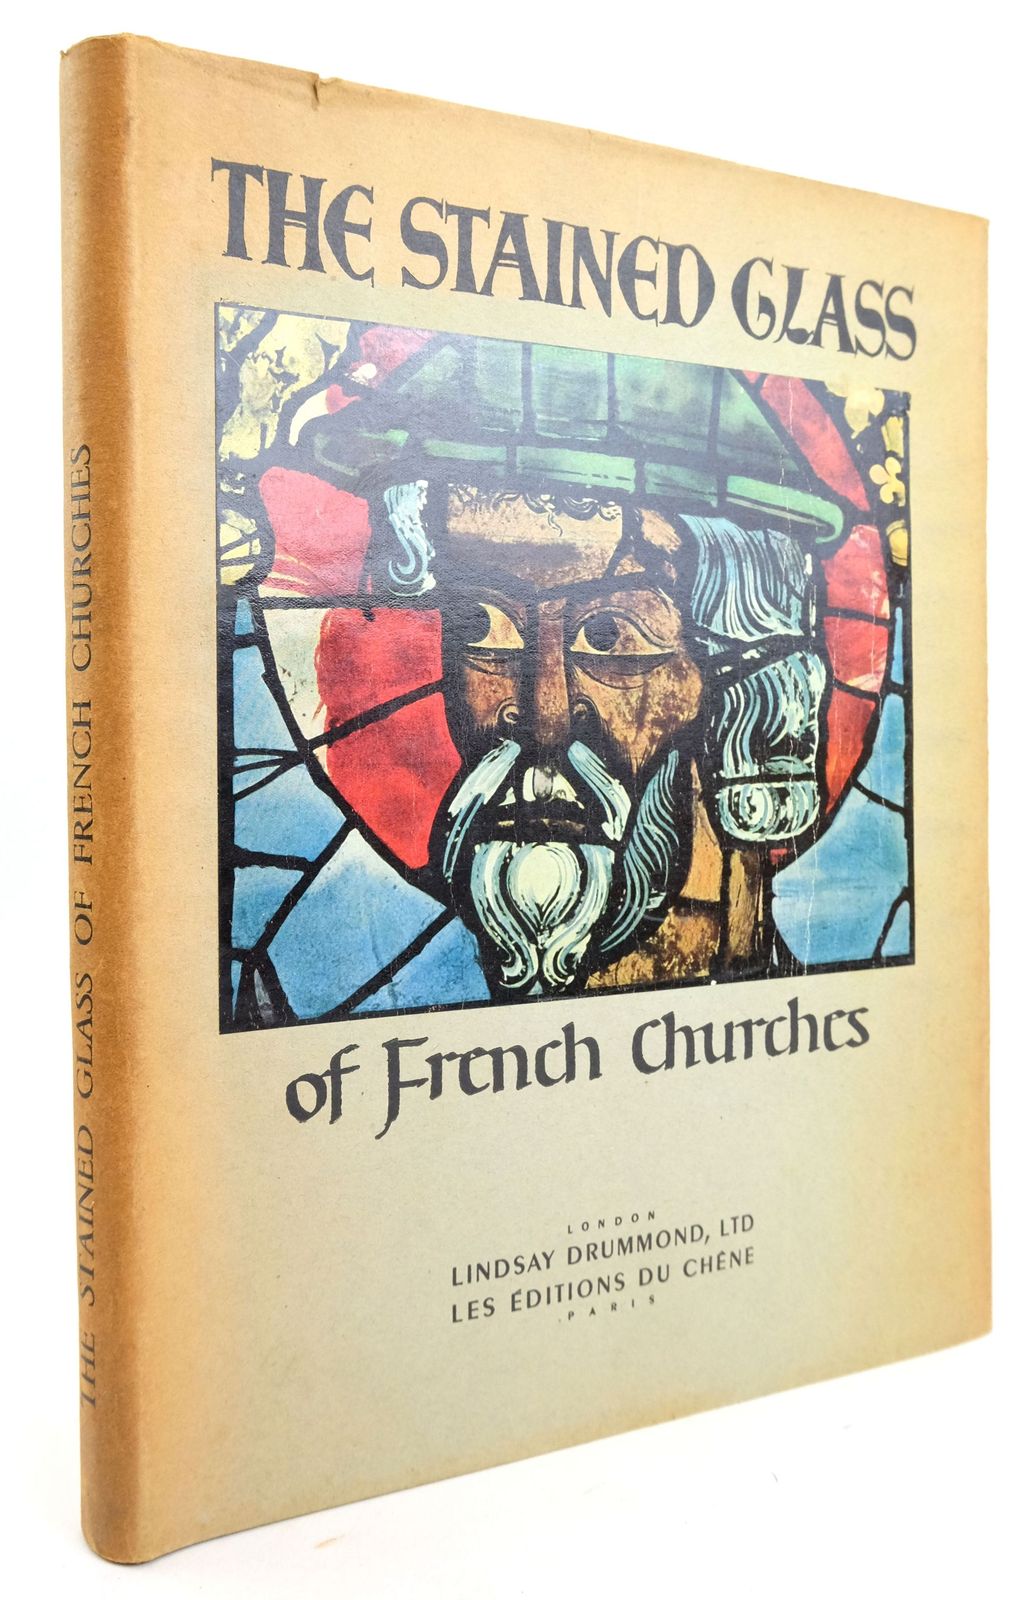 Photo of THE STAINED GLASS OF FRENCH CHURCHES written by Grodecki, Louis published by Lindsay Drummond Ltd. (STOCK CODE: 1819860)  for sale by Stella & Rose's Books